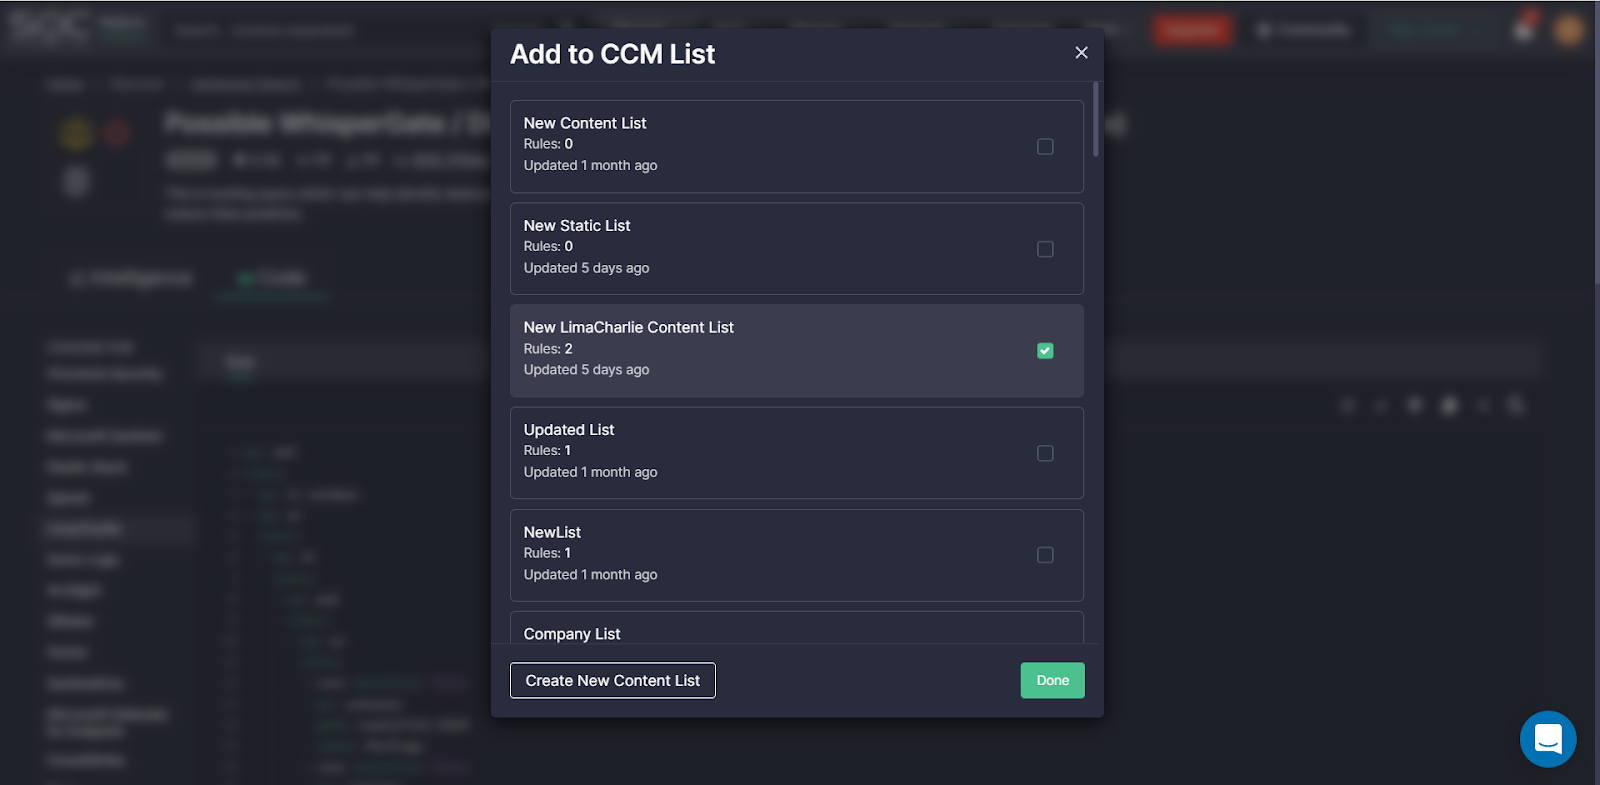 Then, select the Static List from the list of options. If you cannot find the list that matches your needs, click the Create New Content List button to build a new list from scratch. 